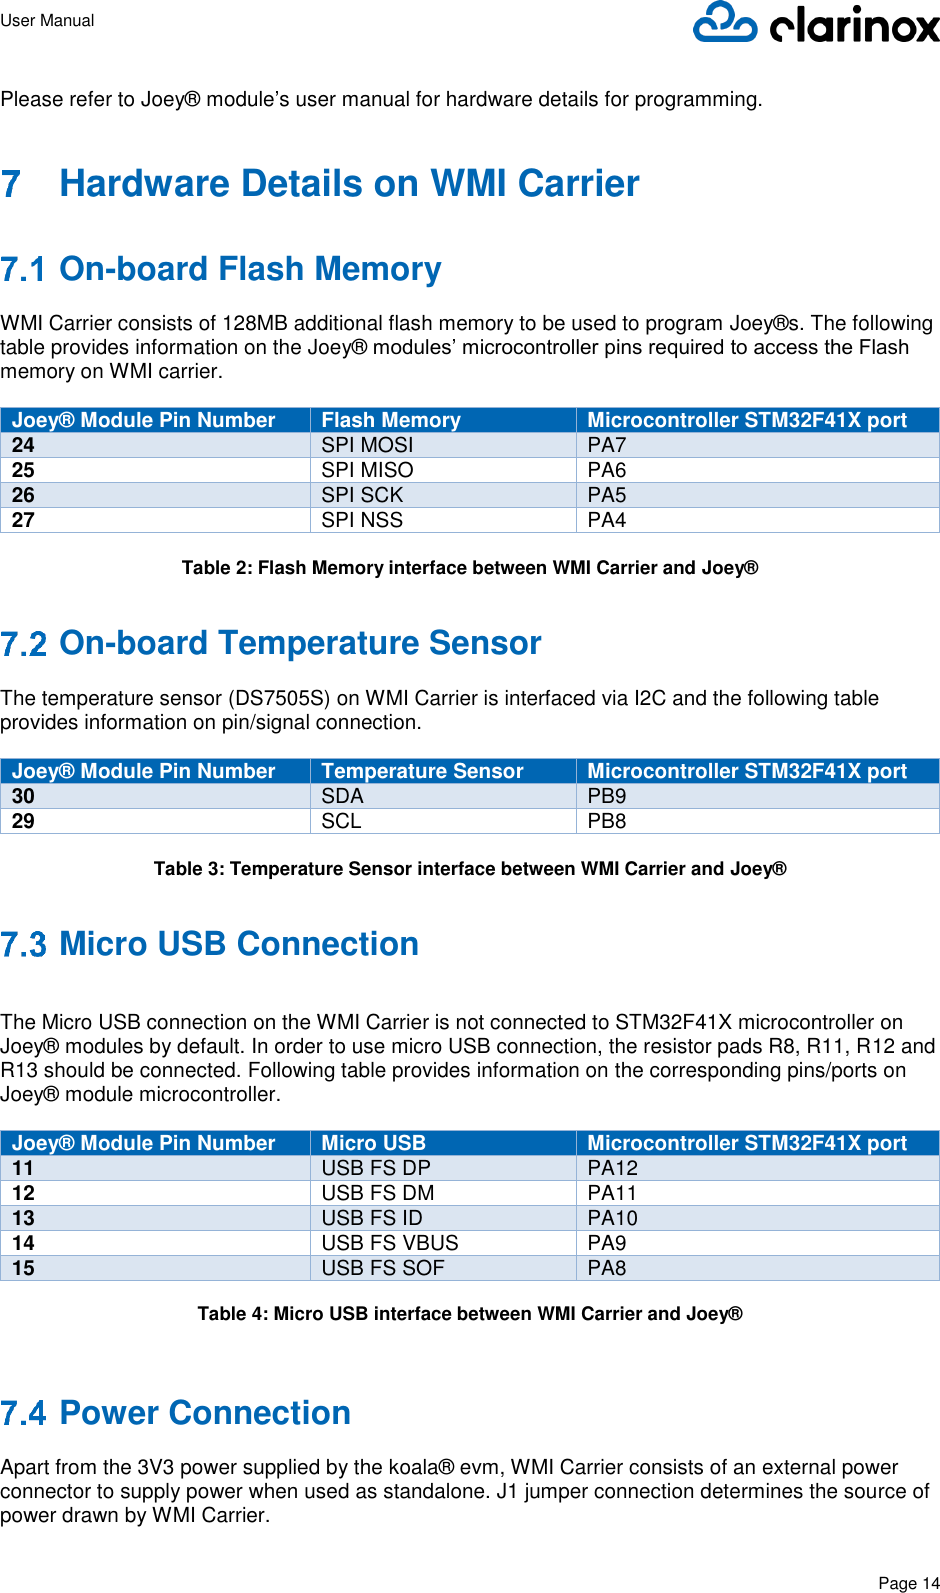 User Manual      Page 14  Please refer to Joey® module’s user manual for hardware details for programming.   Hardware Details on WMI Carrier   On-board Flash Memory  WMI Carrier consists of 128MB additional flash memory to be used to program Joey®s. The following table provides information on the Joey® modules’ microcontroller pins required to access the Flash memory on WMI carrier.  Joey® Module Pin Number Flash Memory Microcontroller STM32F41X port 24 SPI MOSI PA7 25 SPI MISO PA6 26 SPI SCK PA5 27 SPI NSS PA4  Table 2: Flash Memory interface between WMI Carrier and Joey®   On-board Temperature Sensor  The temperature sensor (DS7505S) on WMI Carrier is interfaced via I2C and the following table provides information on pin/signal connection.  Joey® Module Pin Number Temperature Sensor Microcontroller STM32F41X port 30 SDA PB9 29 SCL PB8  Table 3: Temperature Sensor interface between WMI Carrier and Joey®   Micro USB Connection   The Micro USB connection on the WMI Carrier is not connected to STM32F41X microcontroller on Joey® modules by default. In order to use micro USB connection, the resistor pads R8, R11, R12 and R13 should be connected. Following table provides information on the corresponding pins/ports on Joey® module microcontroller.  Joey® Module Pin Number Micro USB  Microcontroller STM32F41X port 11 USB FS DP PA12 12 USB FS DM PA11 13 USB FS ID PA10 14 USB FS VBUS PA9 15 USB FS SOF PA8  Table 4: Micro USB interface between WMI Carrier and Joey®    Power Connection  Apart from the 3V3 power supplied by the koala® evm, WMI Carrier consists of an external power connector to supply power when used as standalone. J1 jumper connection determines the source of power drawn by WMI Carrier.  